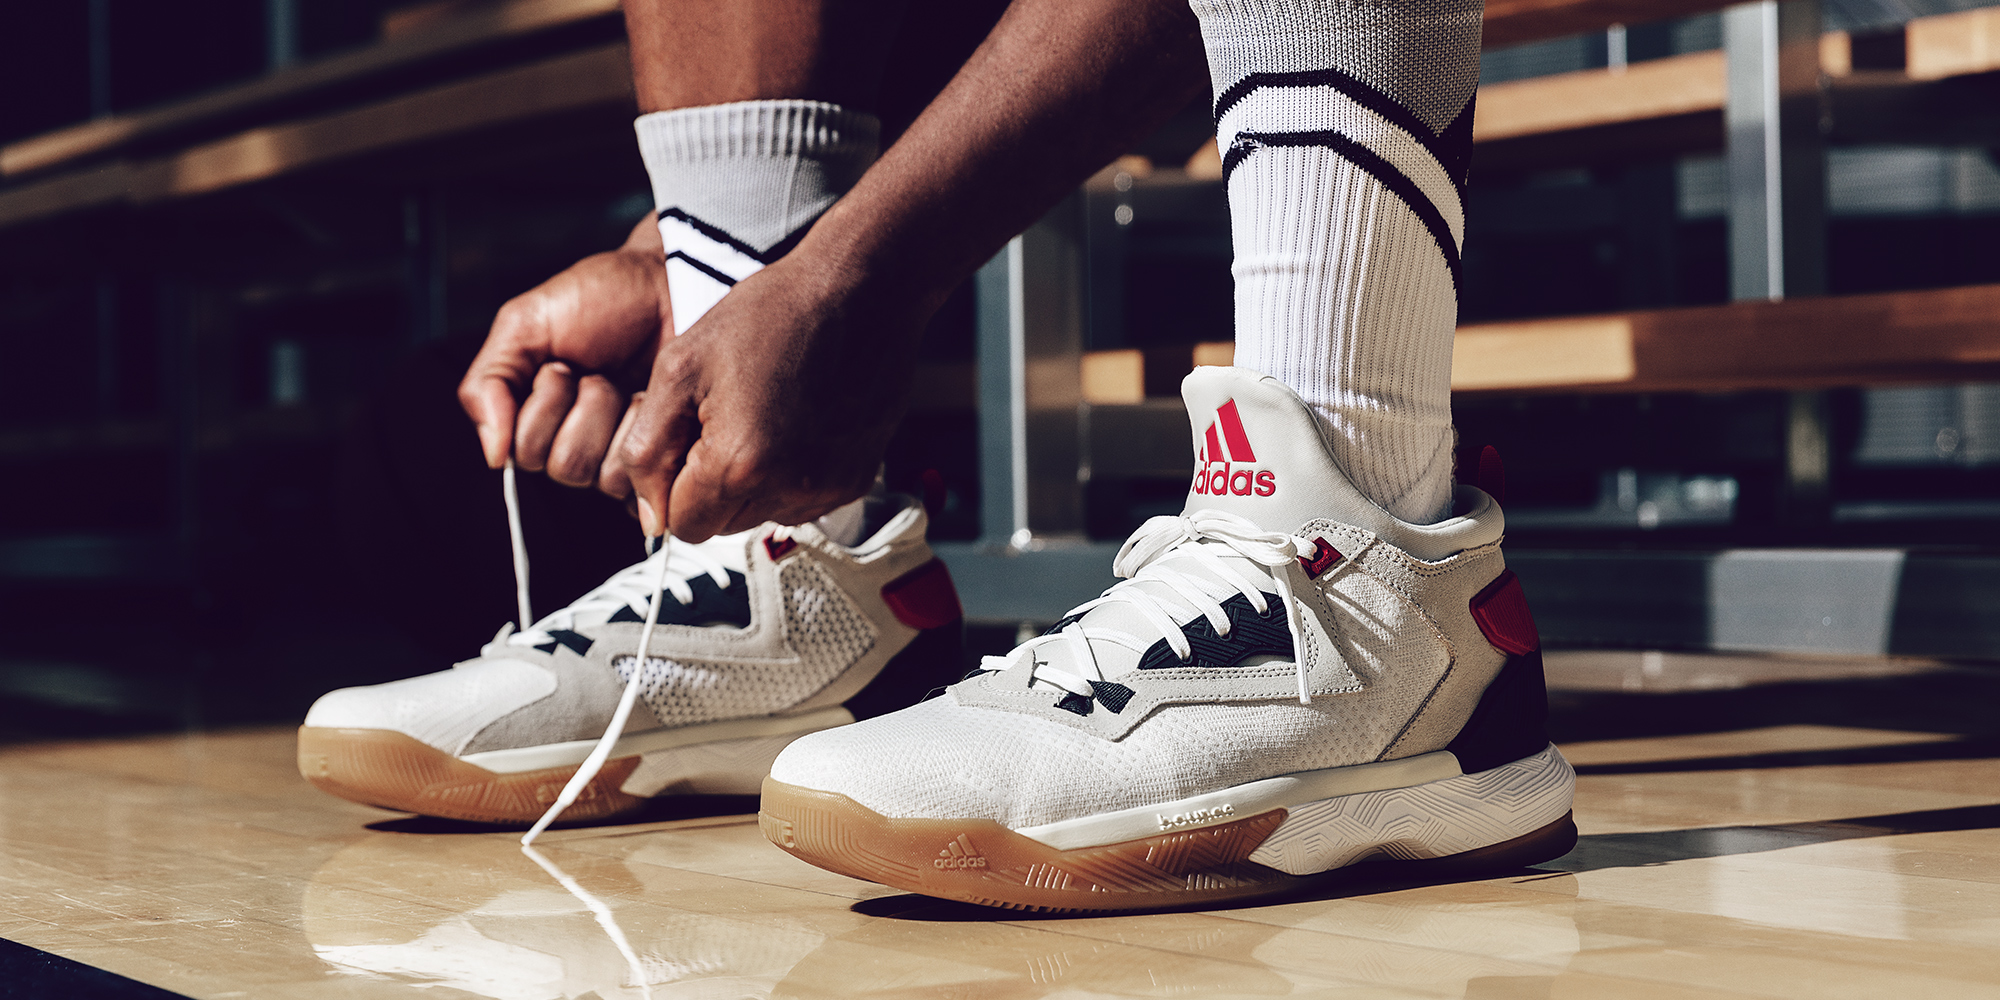 nacimiento Restringir Pantano The adidas D Lillard 2 'Rip City' Colorway is Available Now - WearTesters